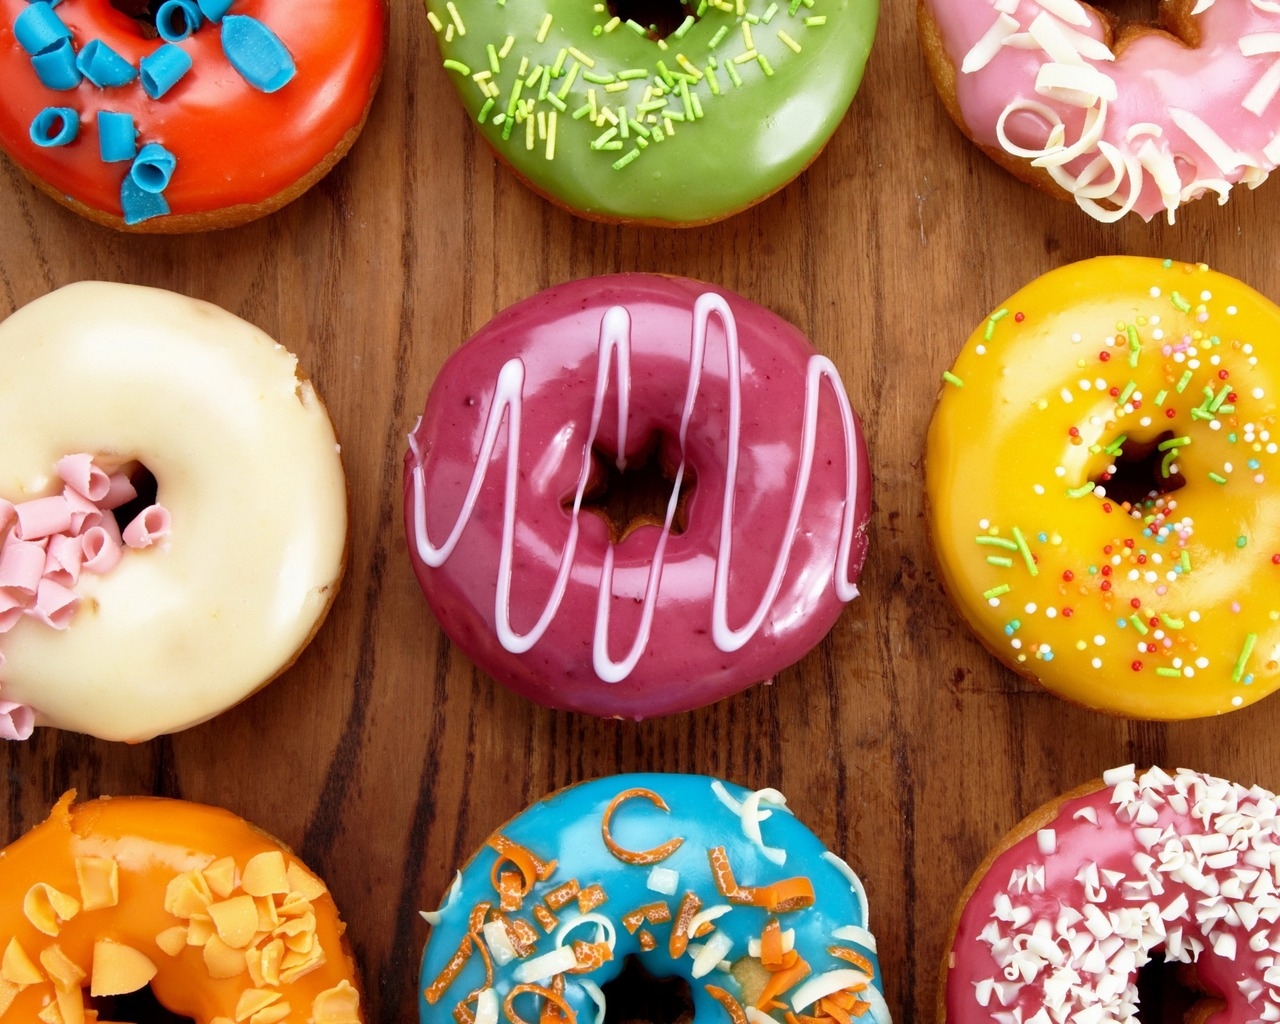 Glazed Donuts for 1280 x 1024 resolution